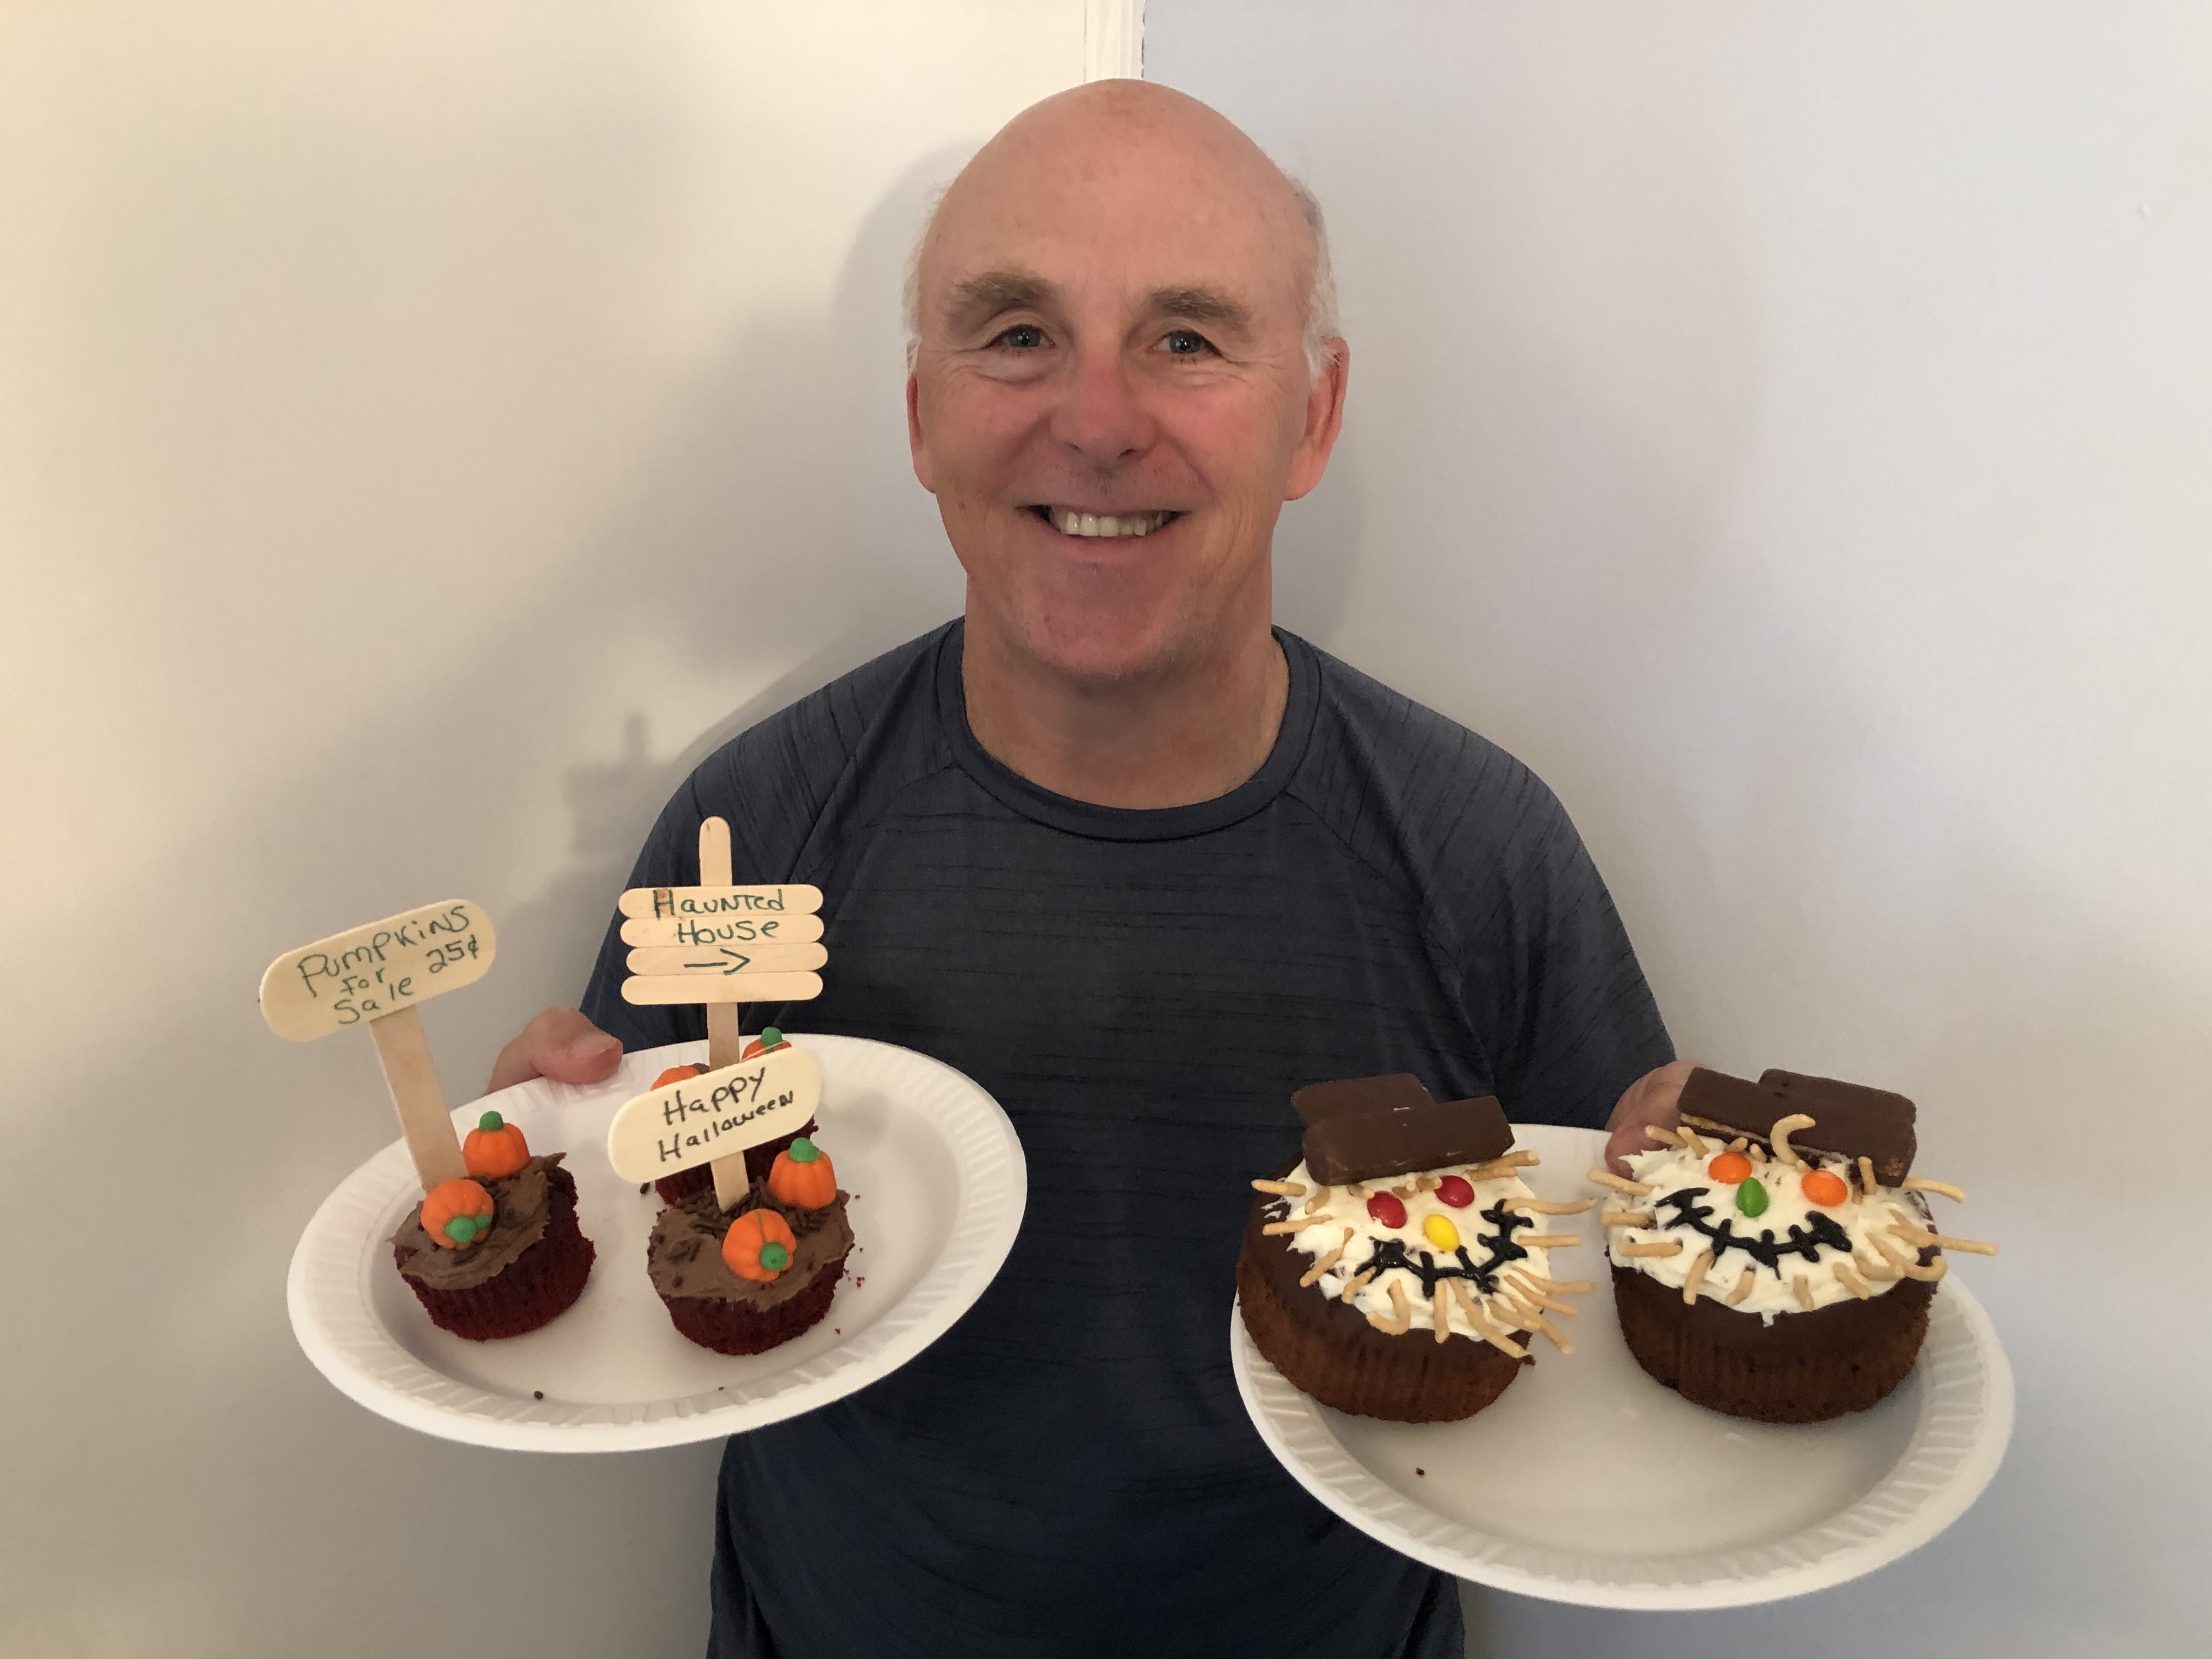 Chef Rob shows off his festive fall cupcakes.